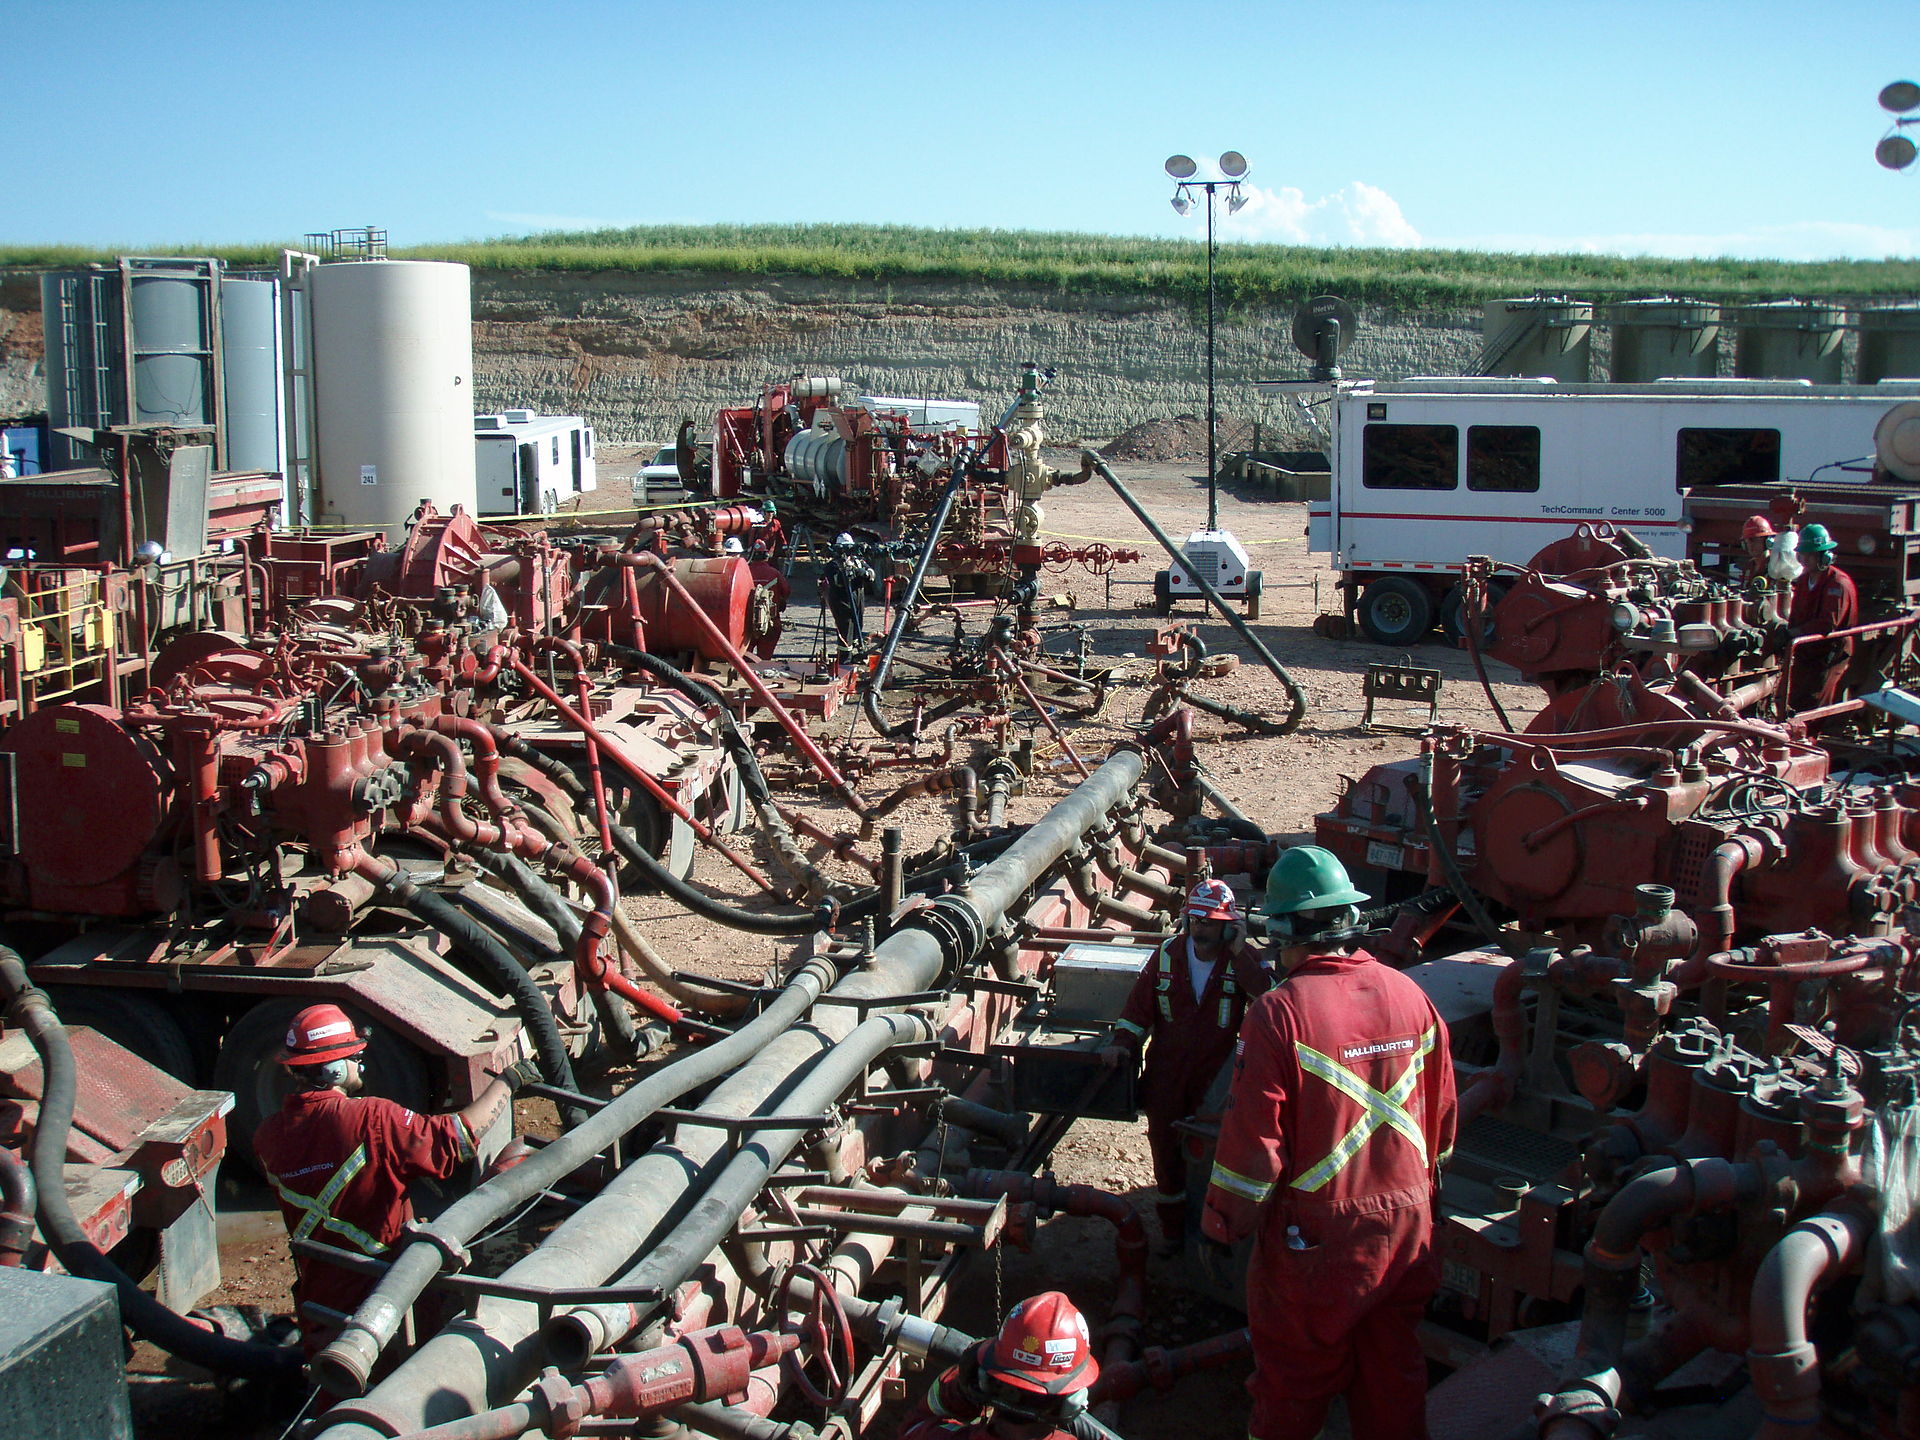 Fracking process has not led to widespread impact on water supplies